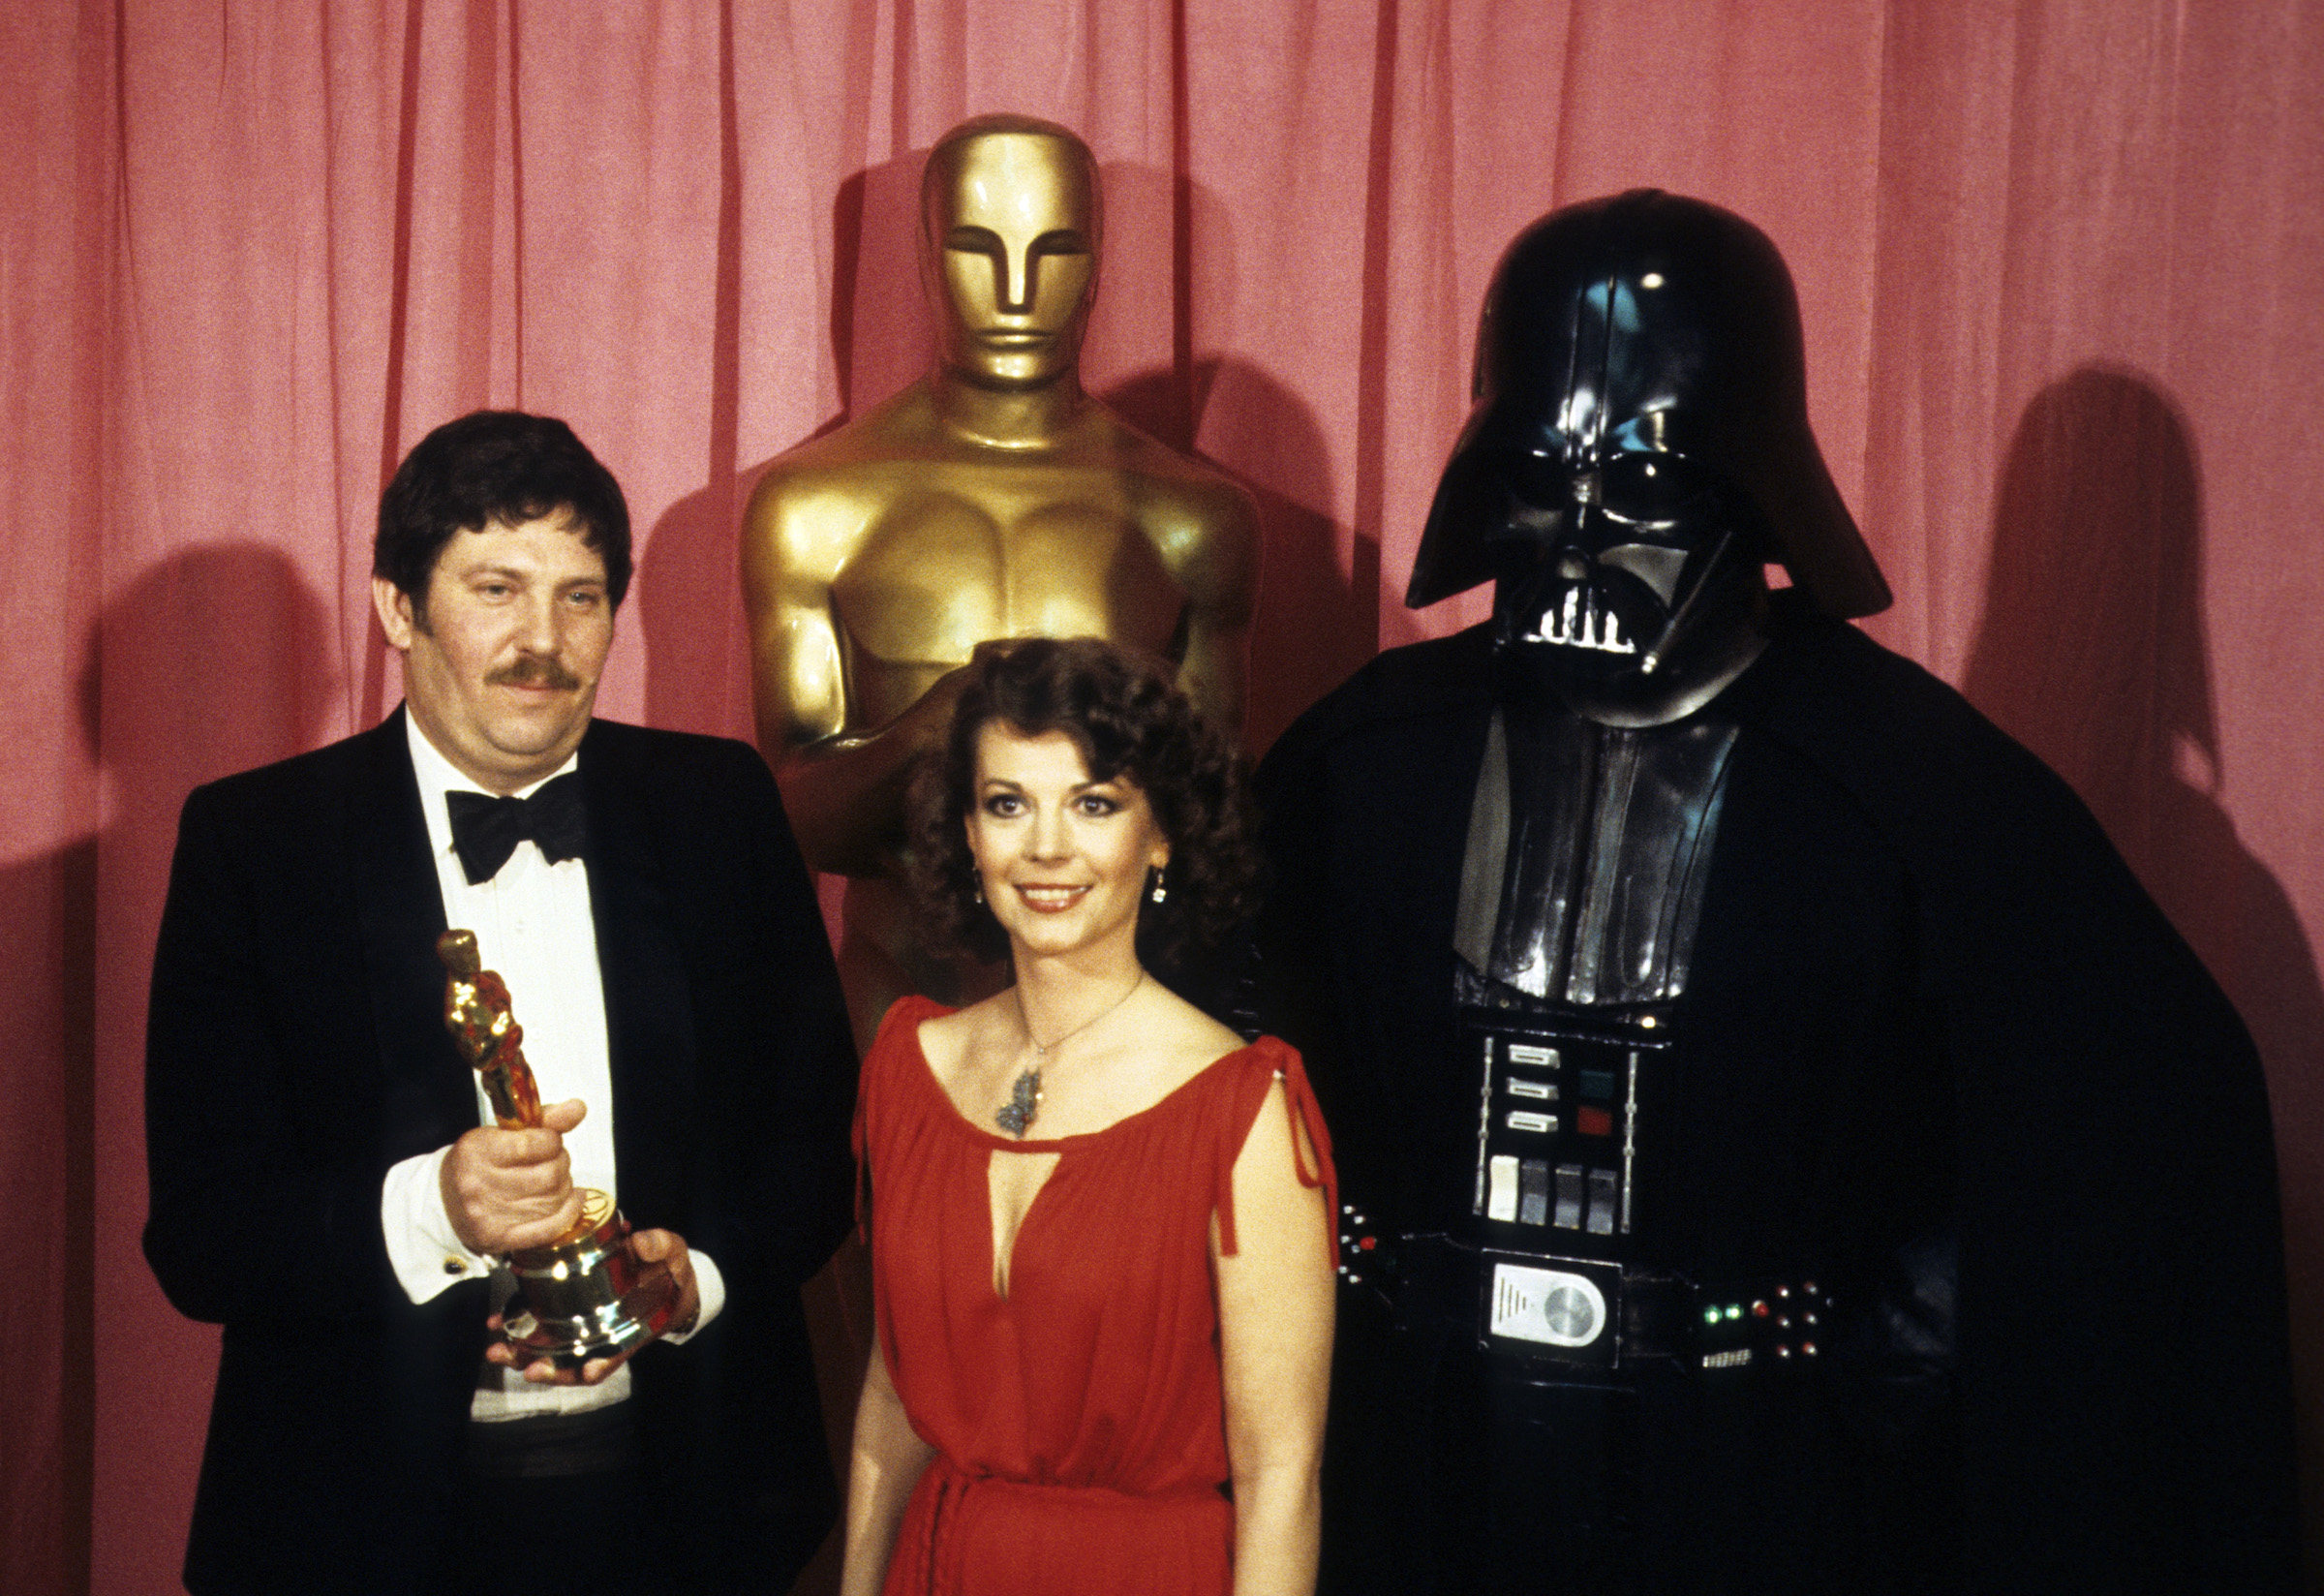 THE 50TH ANNUAL ACADEMY AWARDS - Show Coverage - Shoot Date: April 3, 1978. (Photo by ABC Photo Archives/ABC via Getty Images)
JOHN MOLLO;NATALIE WOOD;DARTH VADER